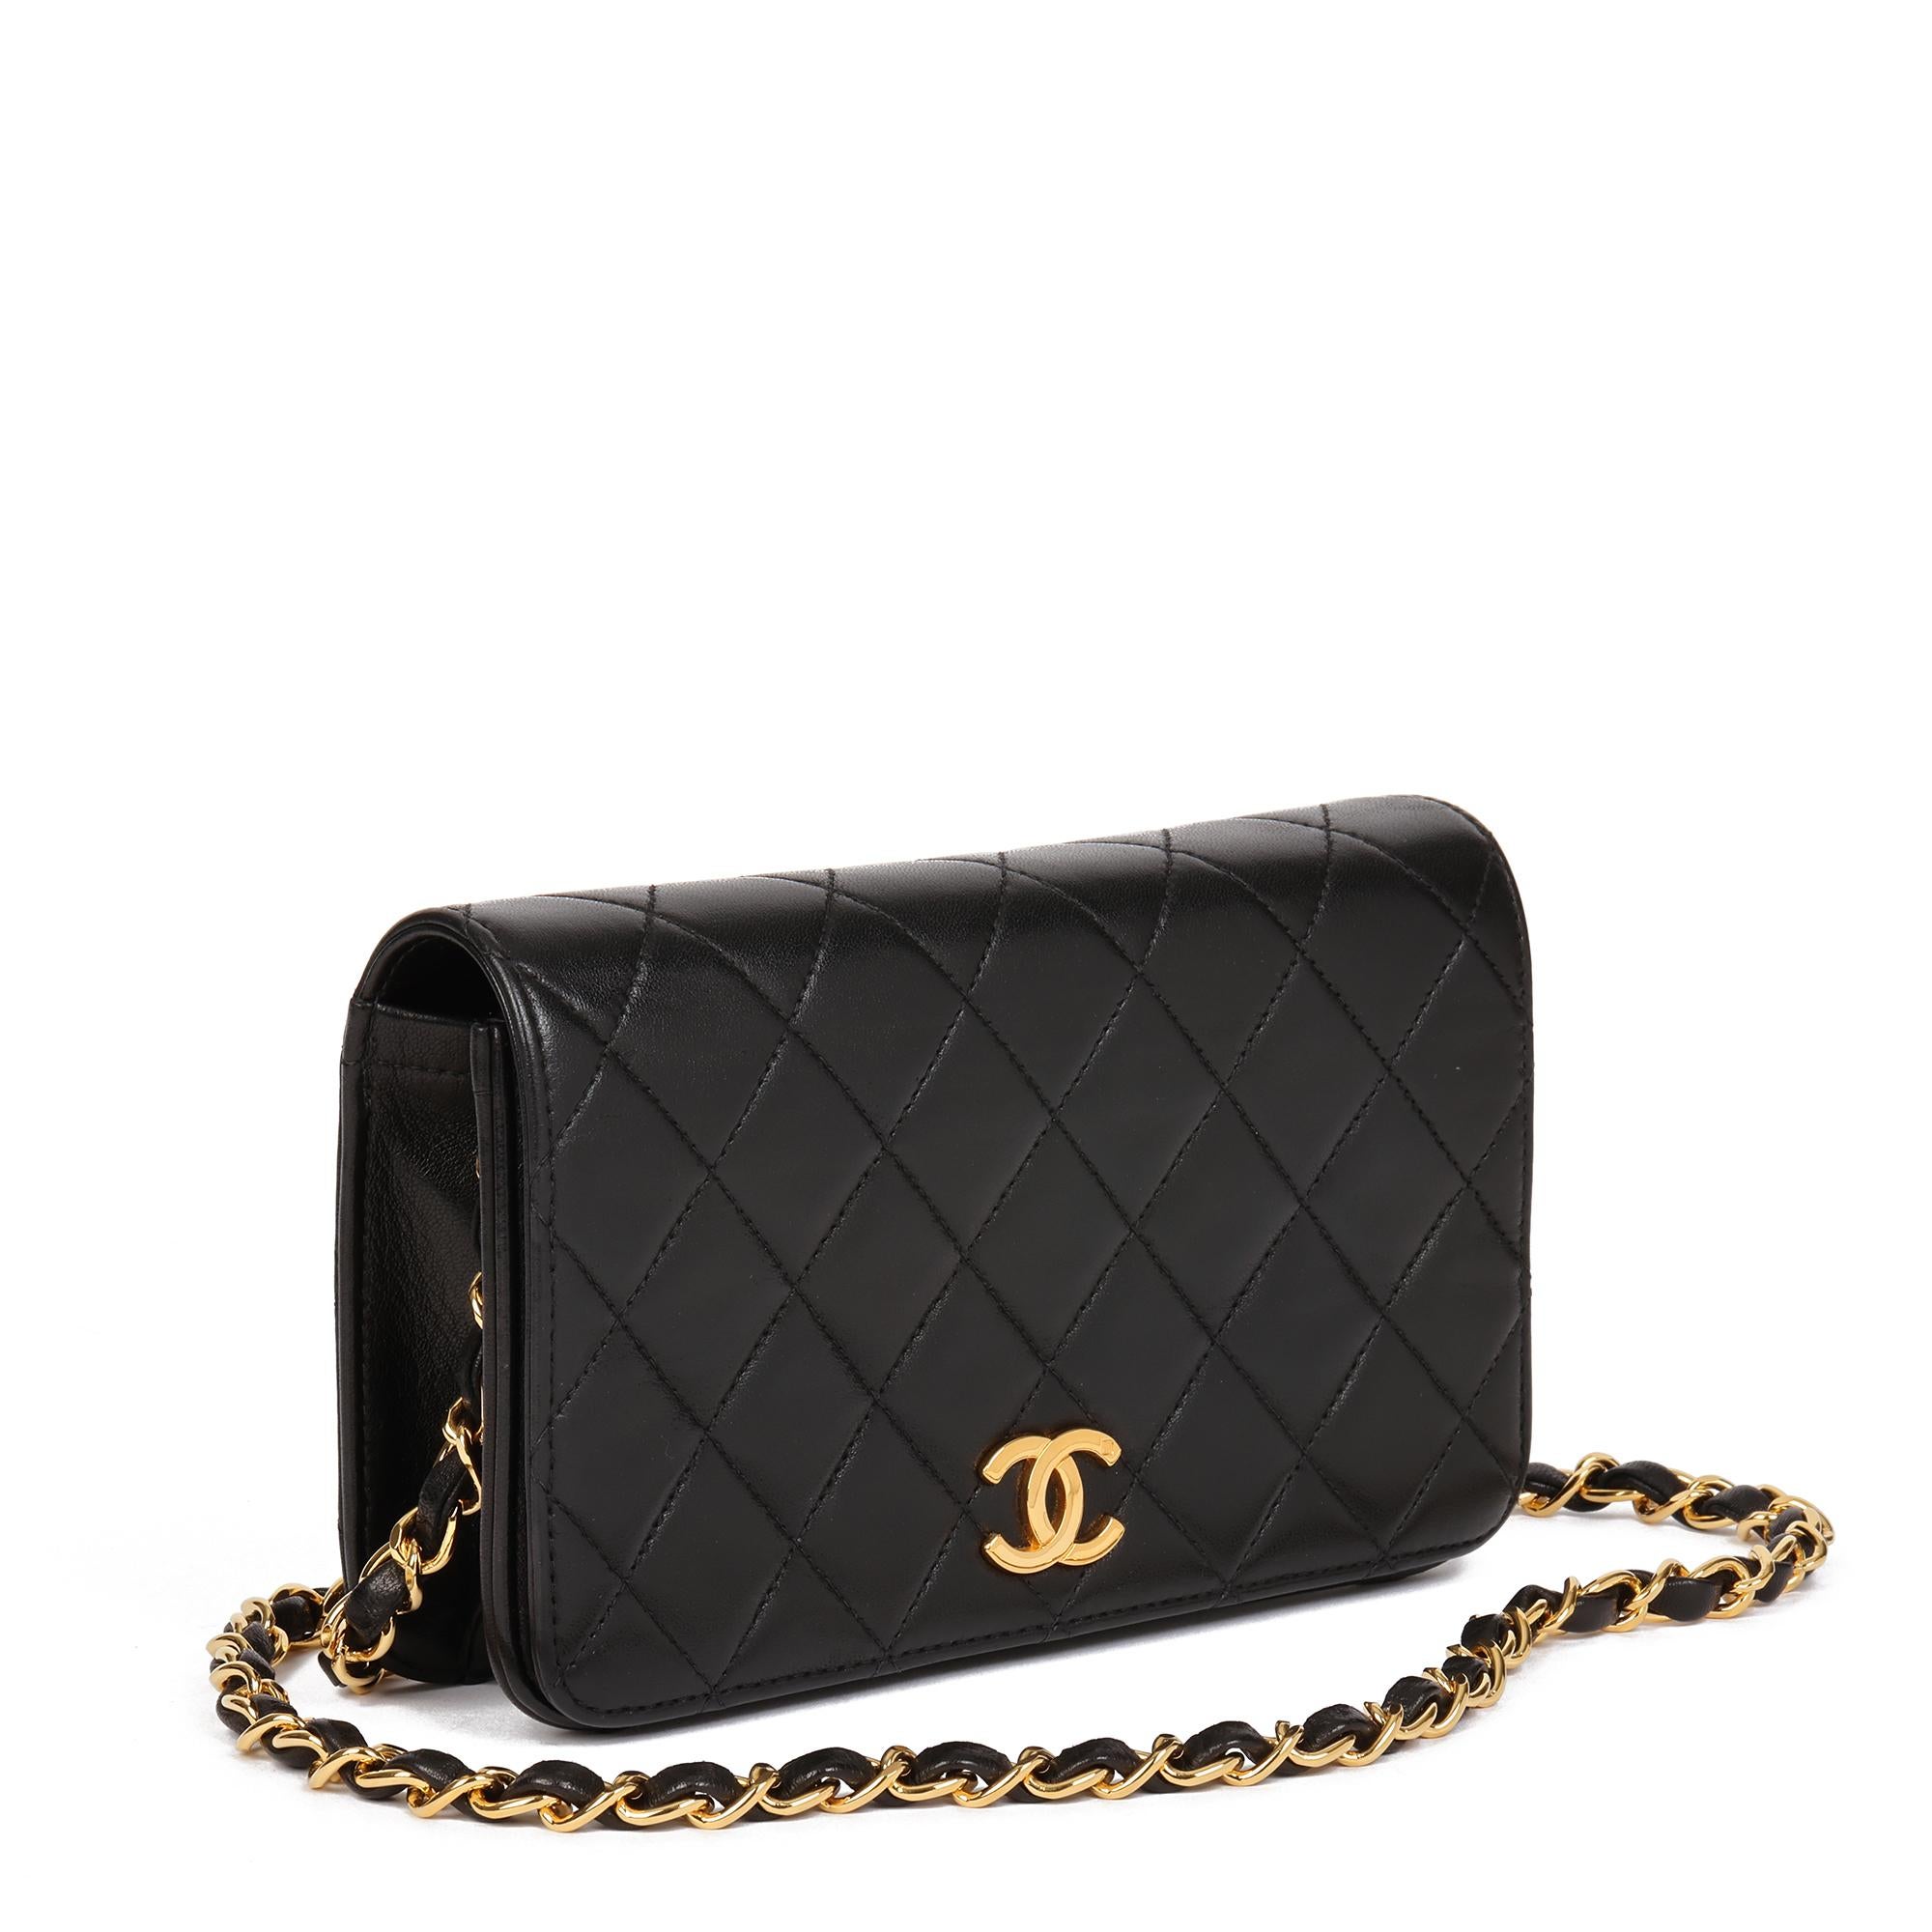 CHANEL
Black Quilted Lambskin Vintage Rectangular Mini Full Flap Bag 

Xupes Reference: HB4704
Serial Number: 4919139
Age (Circa): 1997
Accompanied By: Authenticity Card
Authenticity Details: Authenticity Card, Serial Sticker (Made in